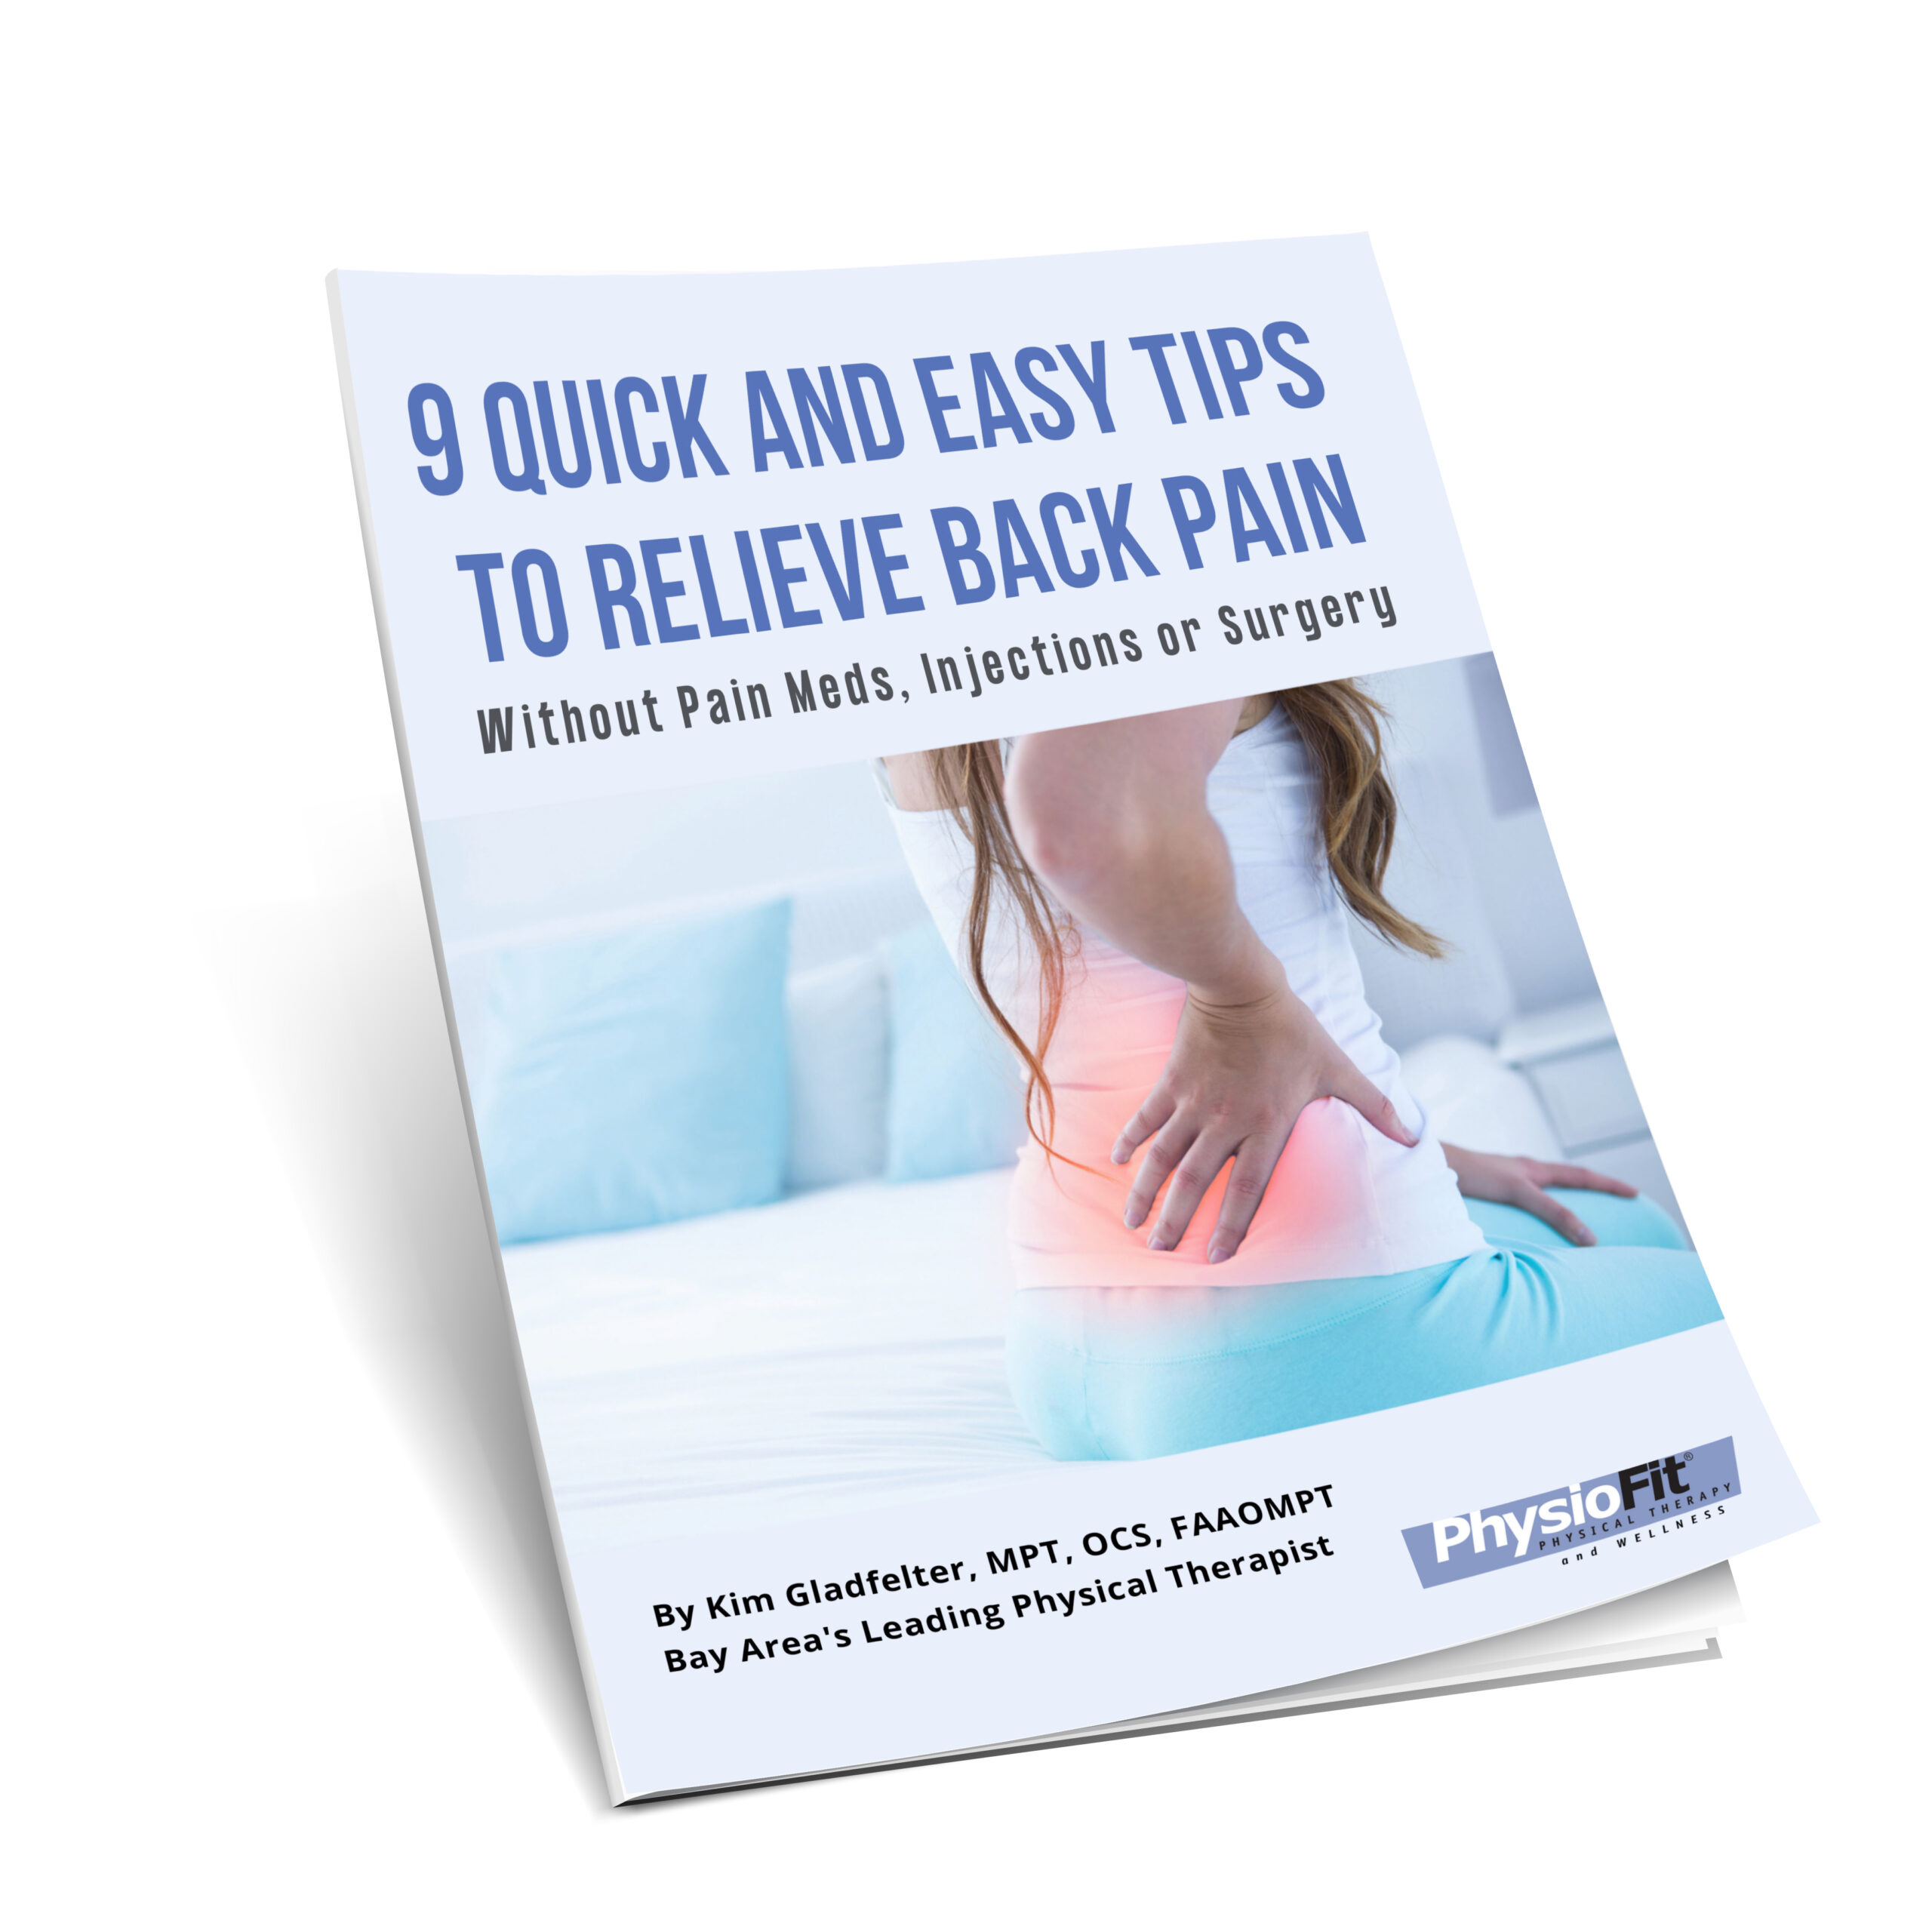 15 Simple Tips When Sleeping With Sciatica